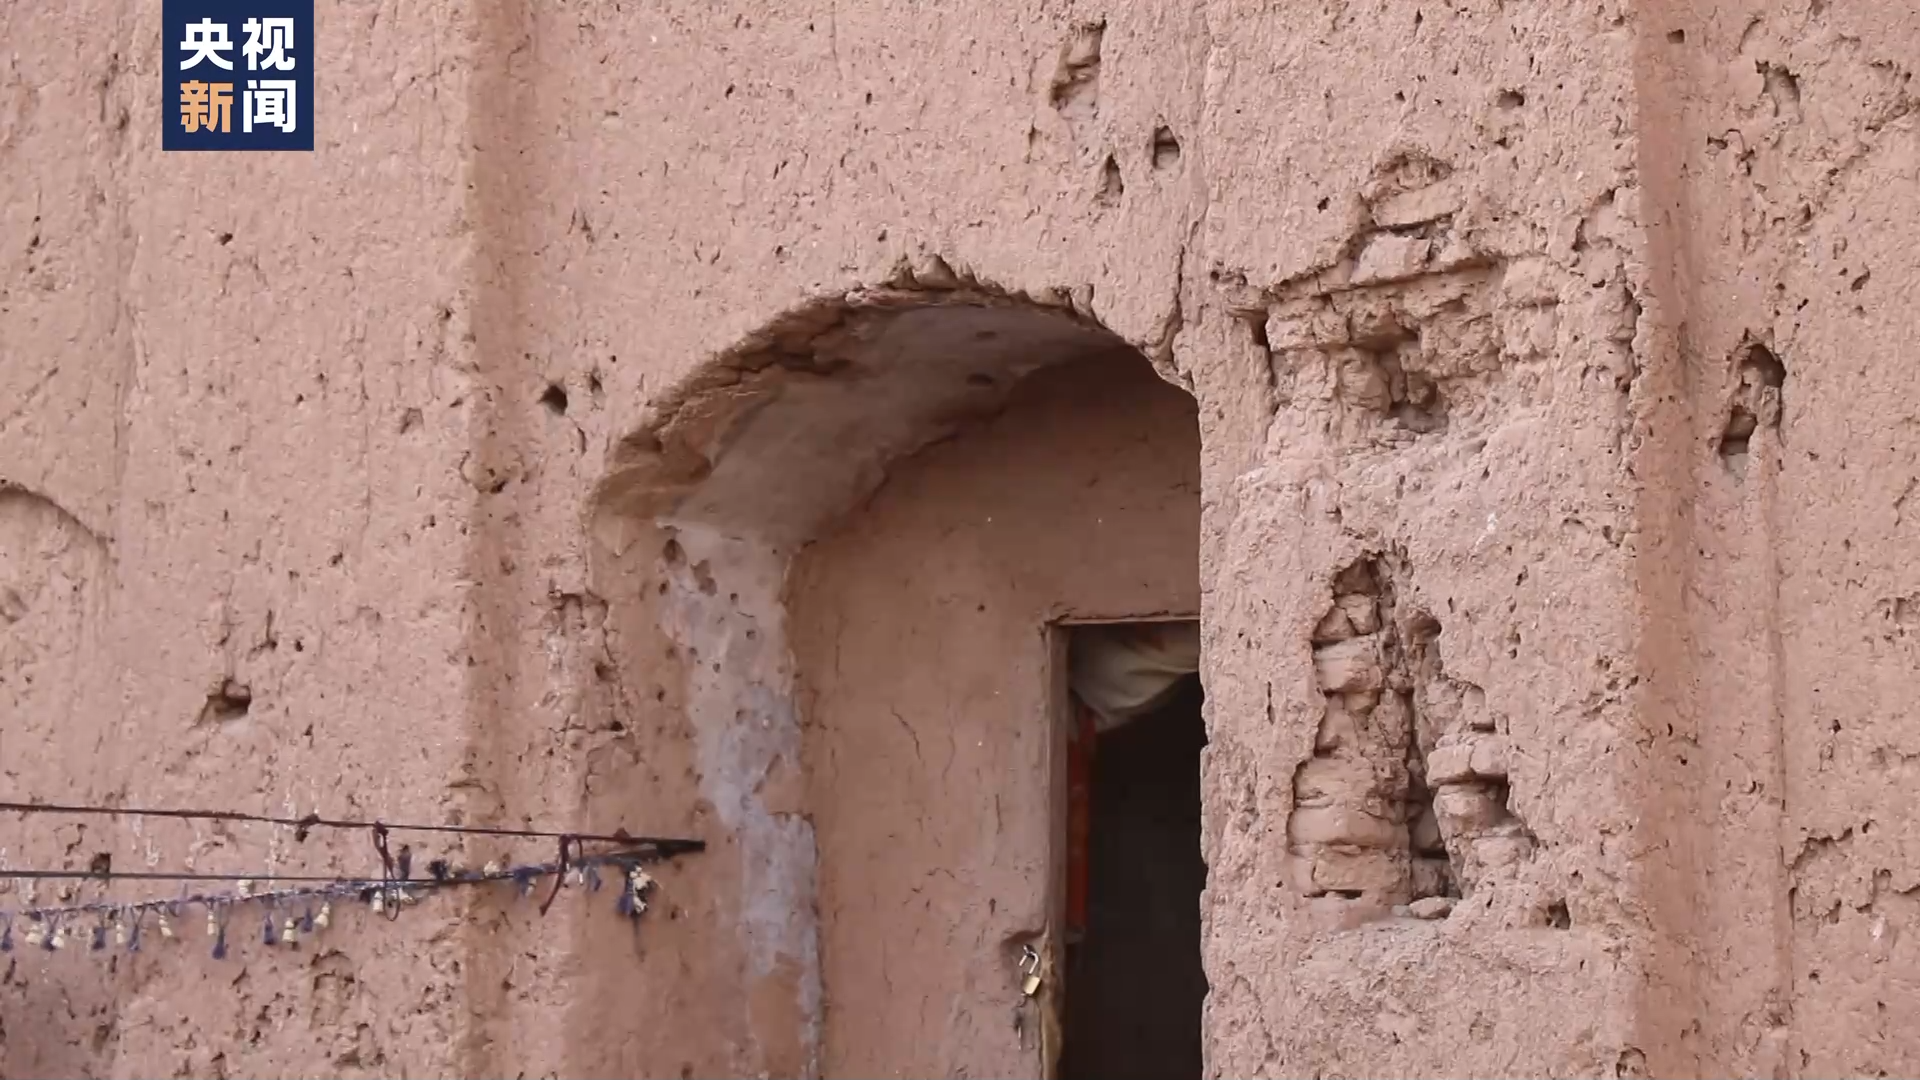 A view of a house destroyed by U.S. cluster bombs in Herat City, Afghanistan. /China Media Group